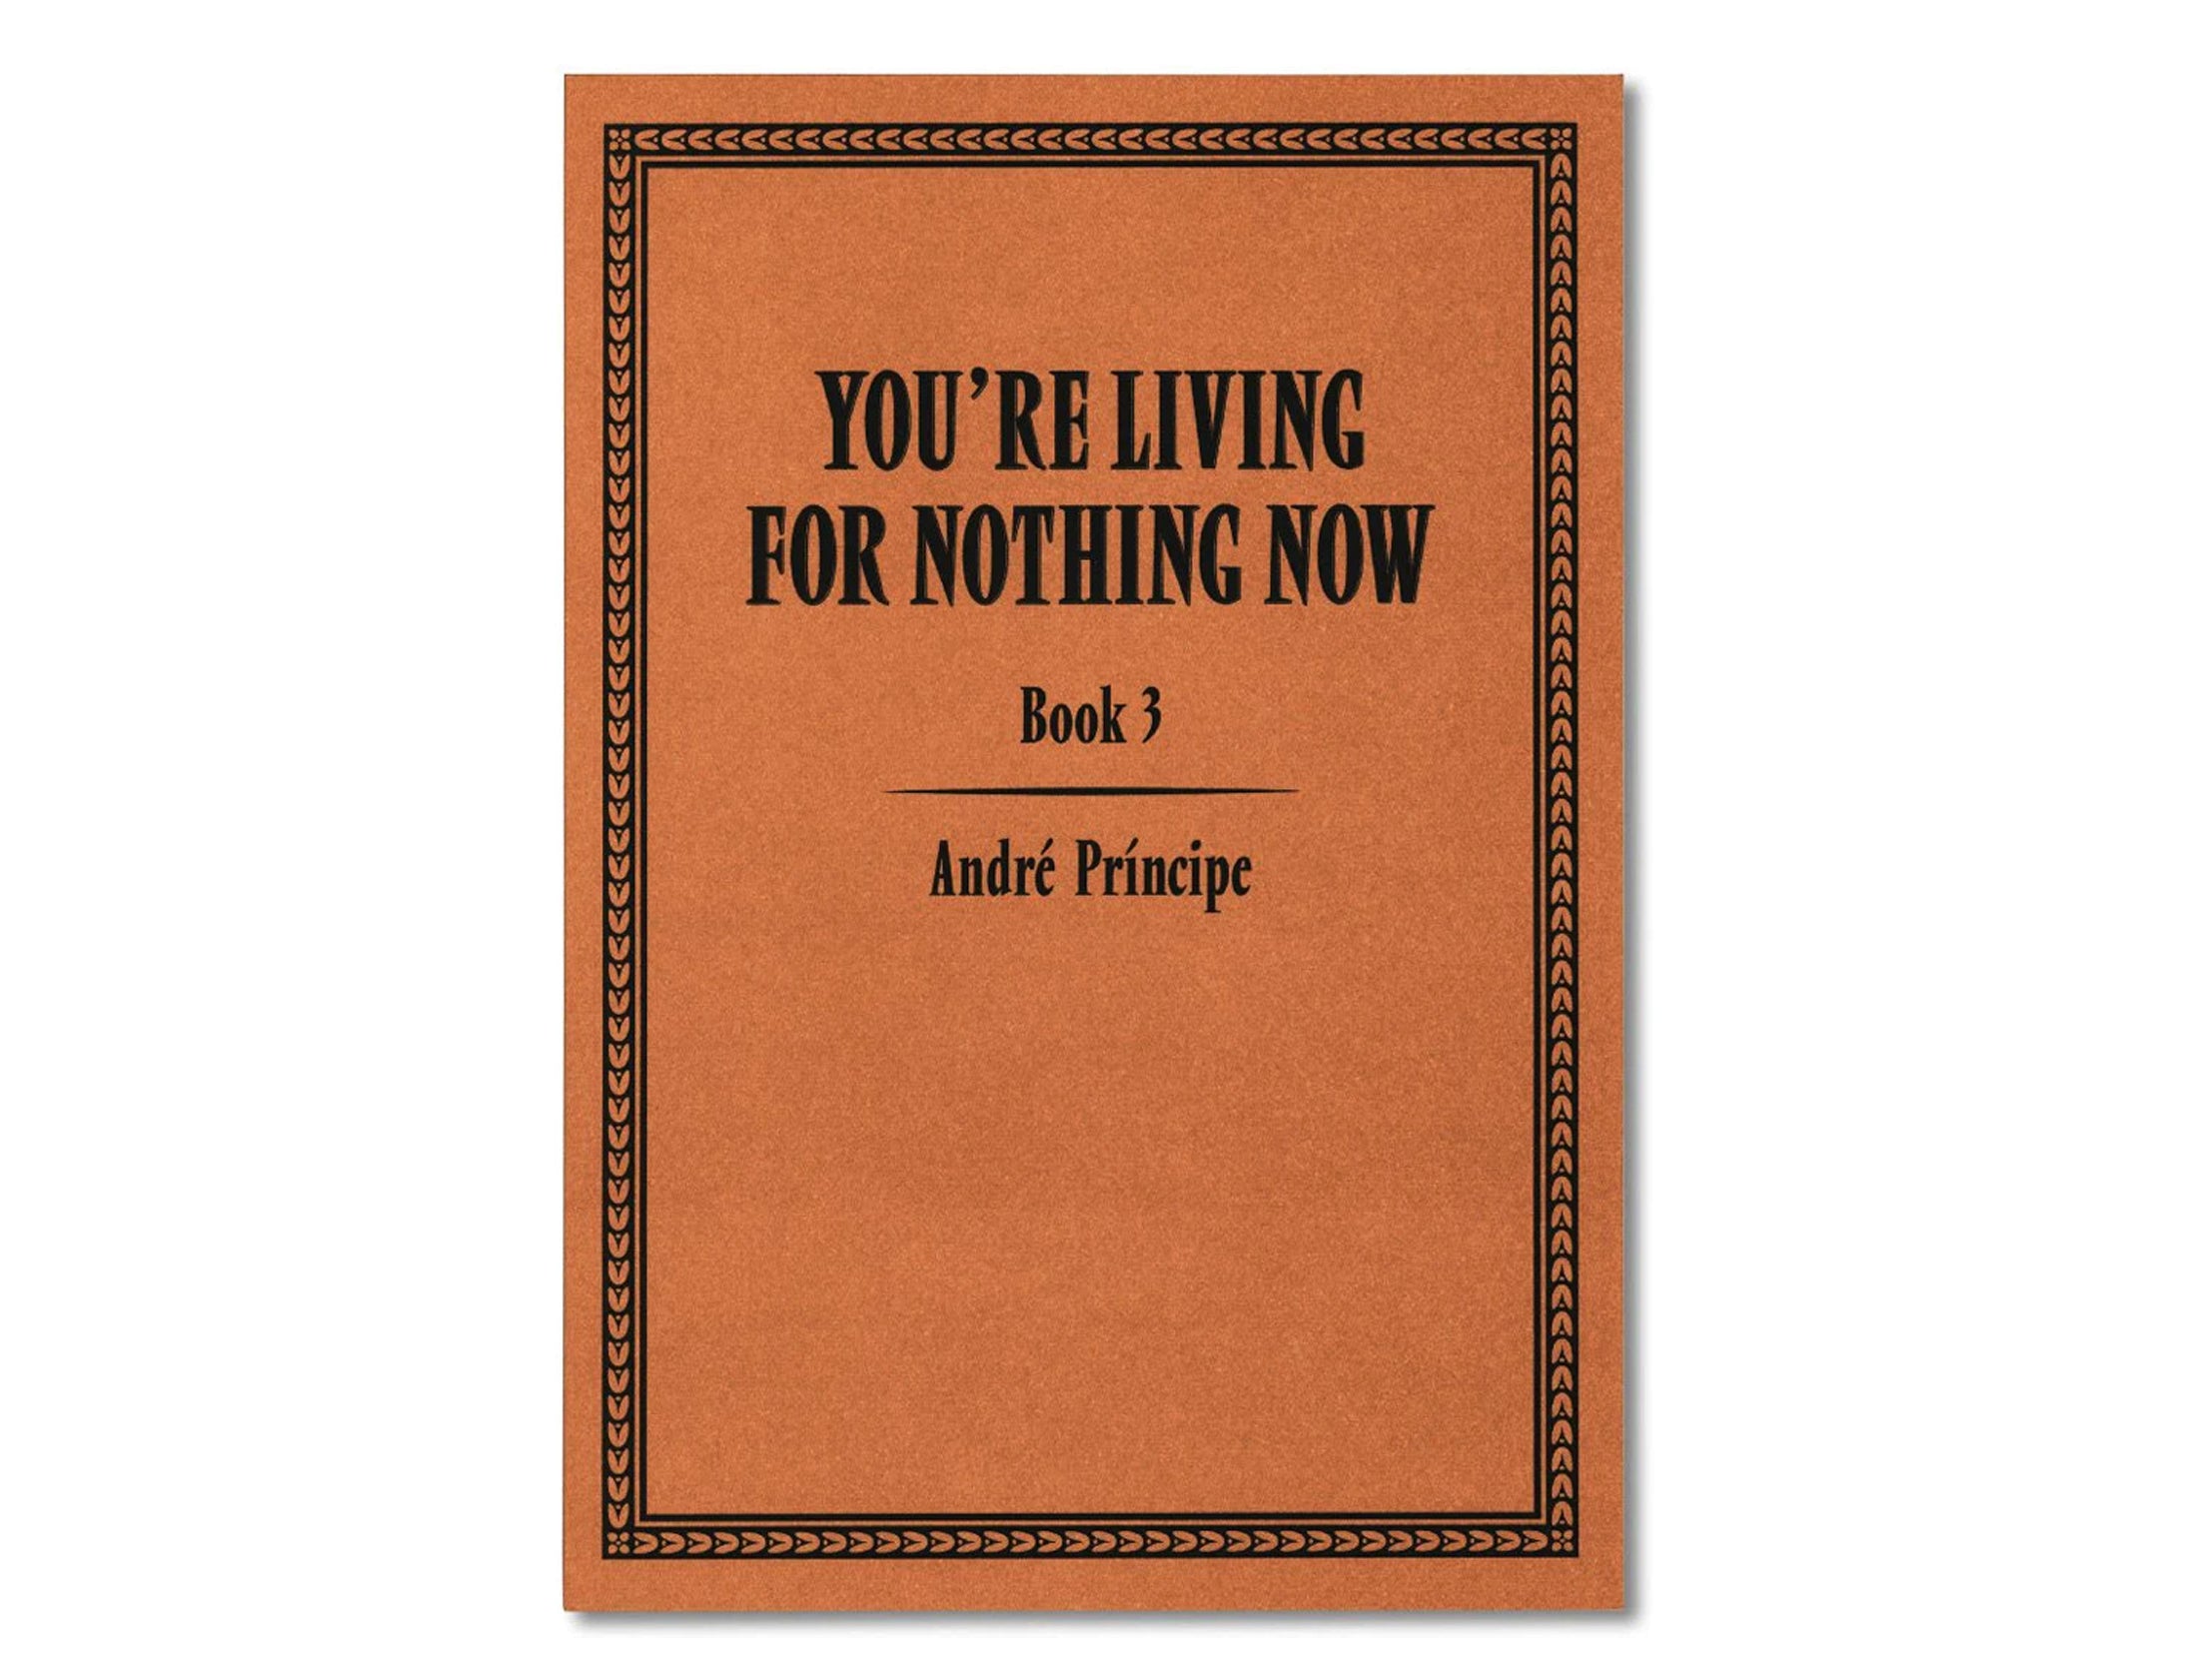 YOU'RE LIVING FOR NOTHING NOW (BOOK 3)<br>André Príncipe